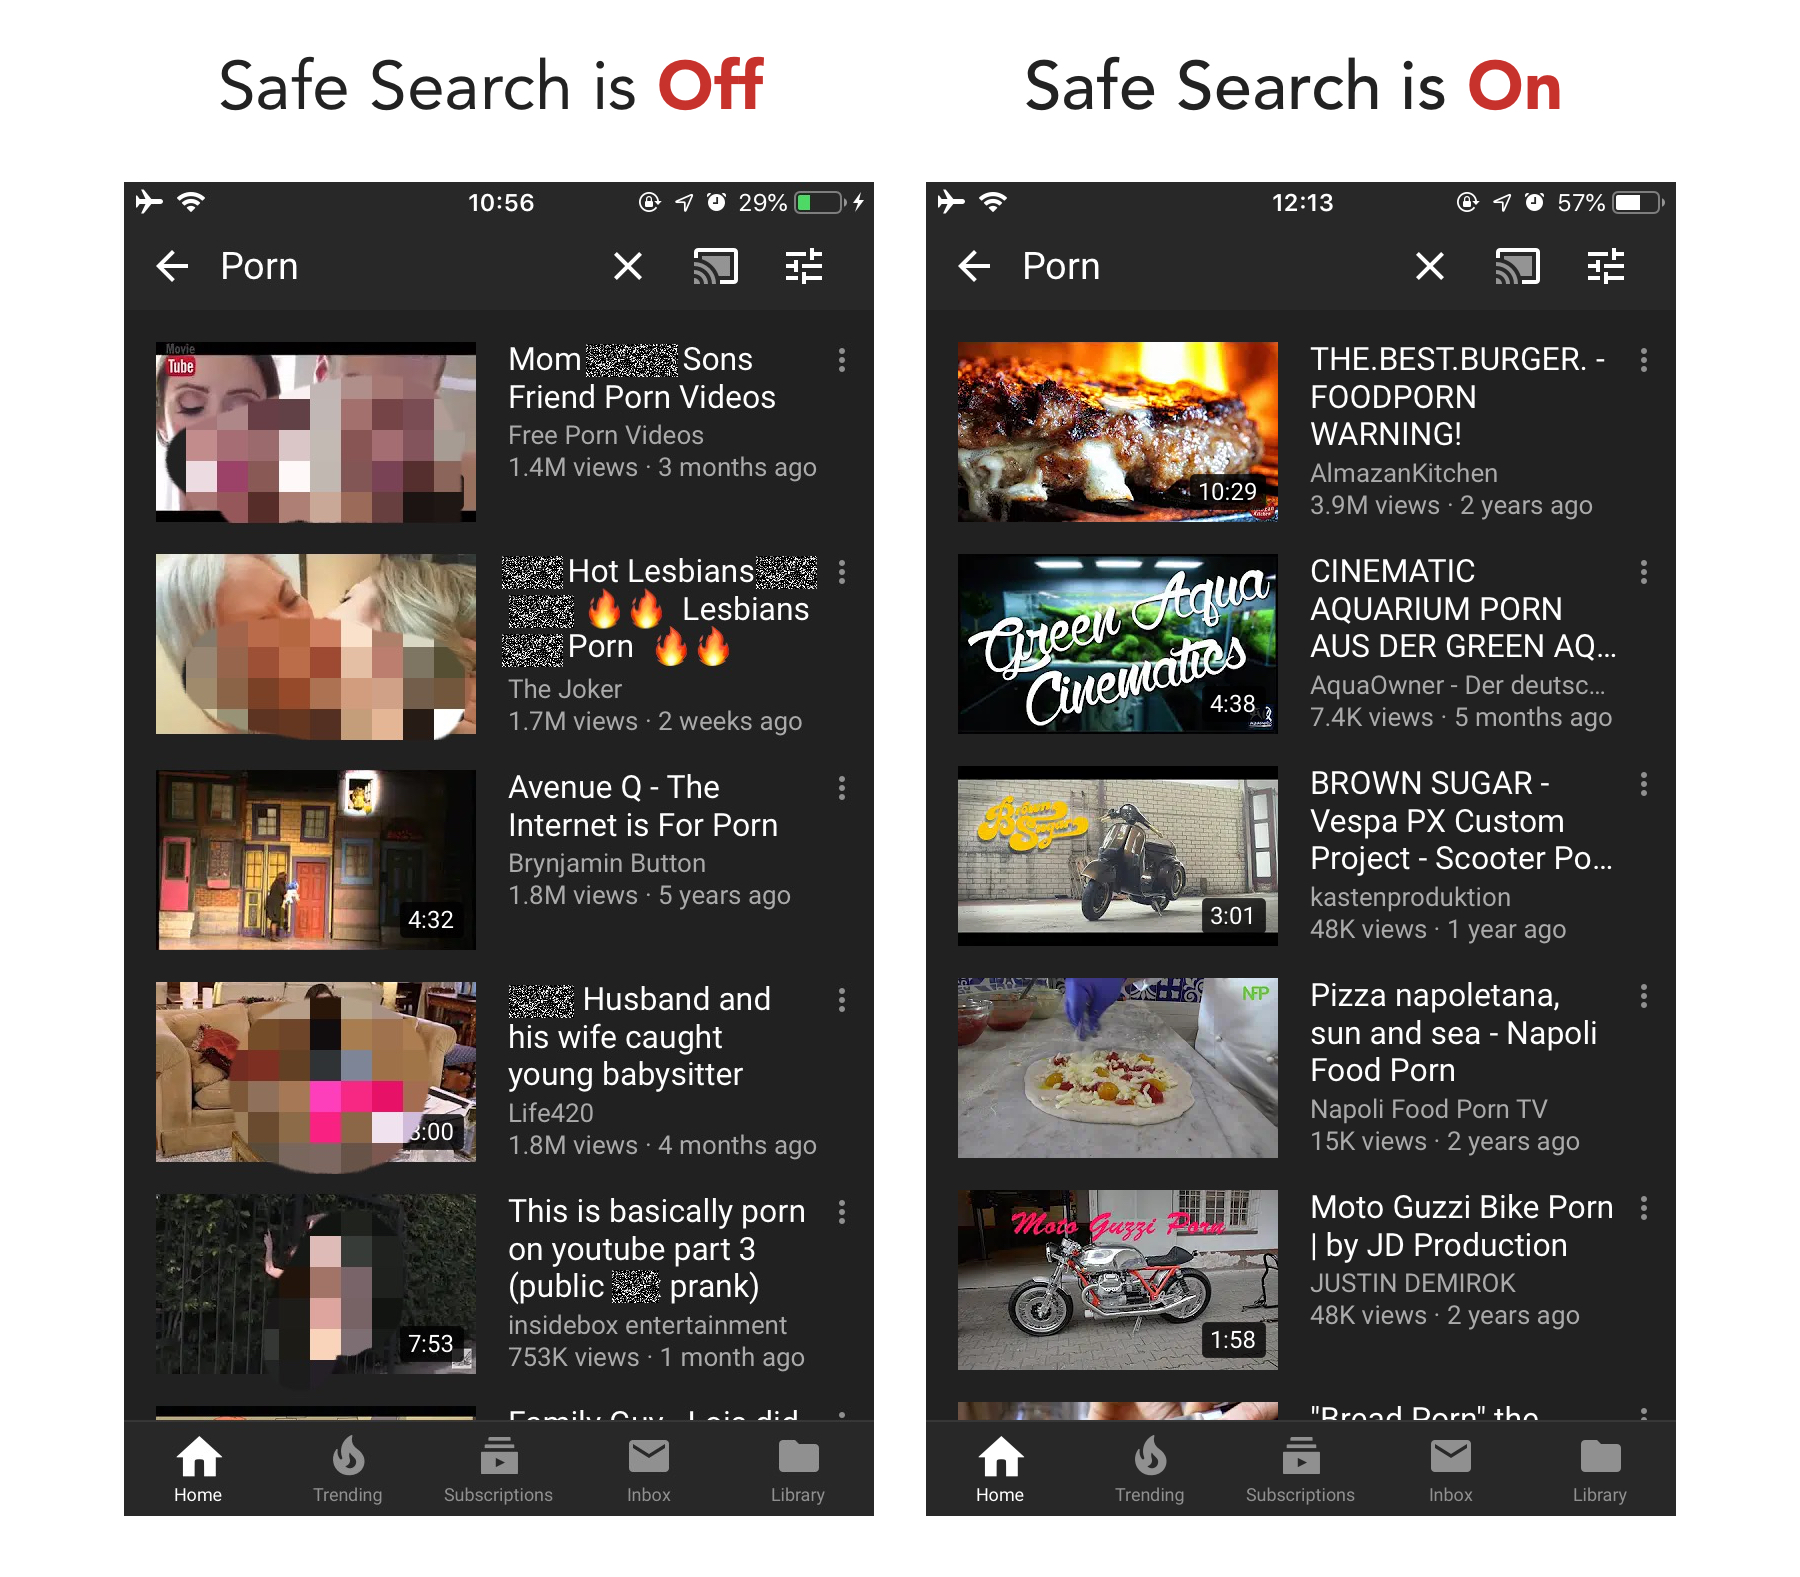 YouTube Safe Search OFF vs. ON